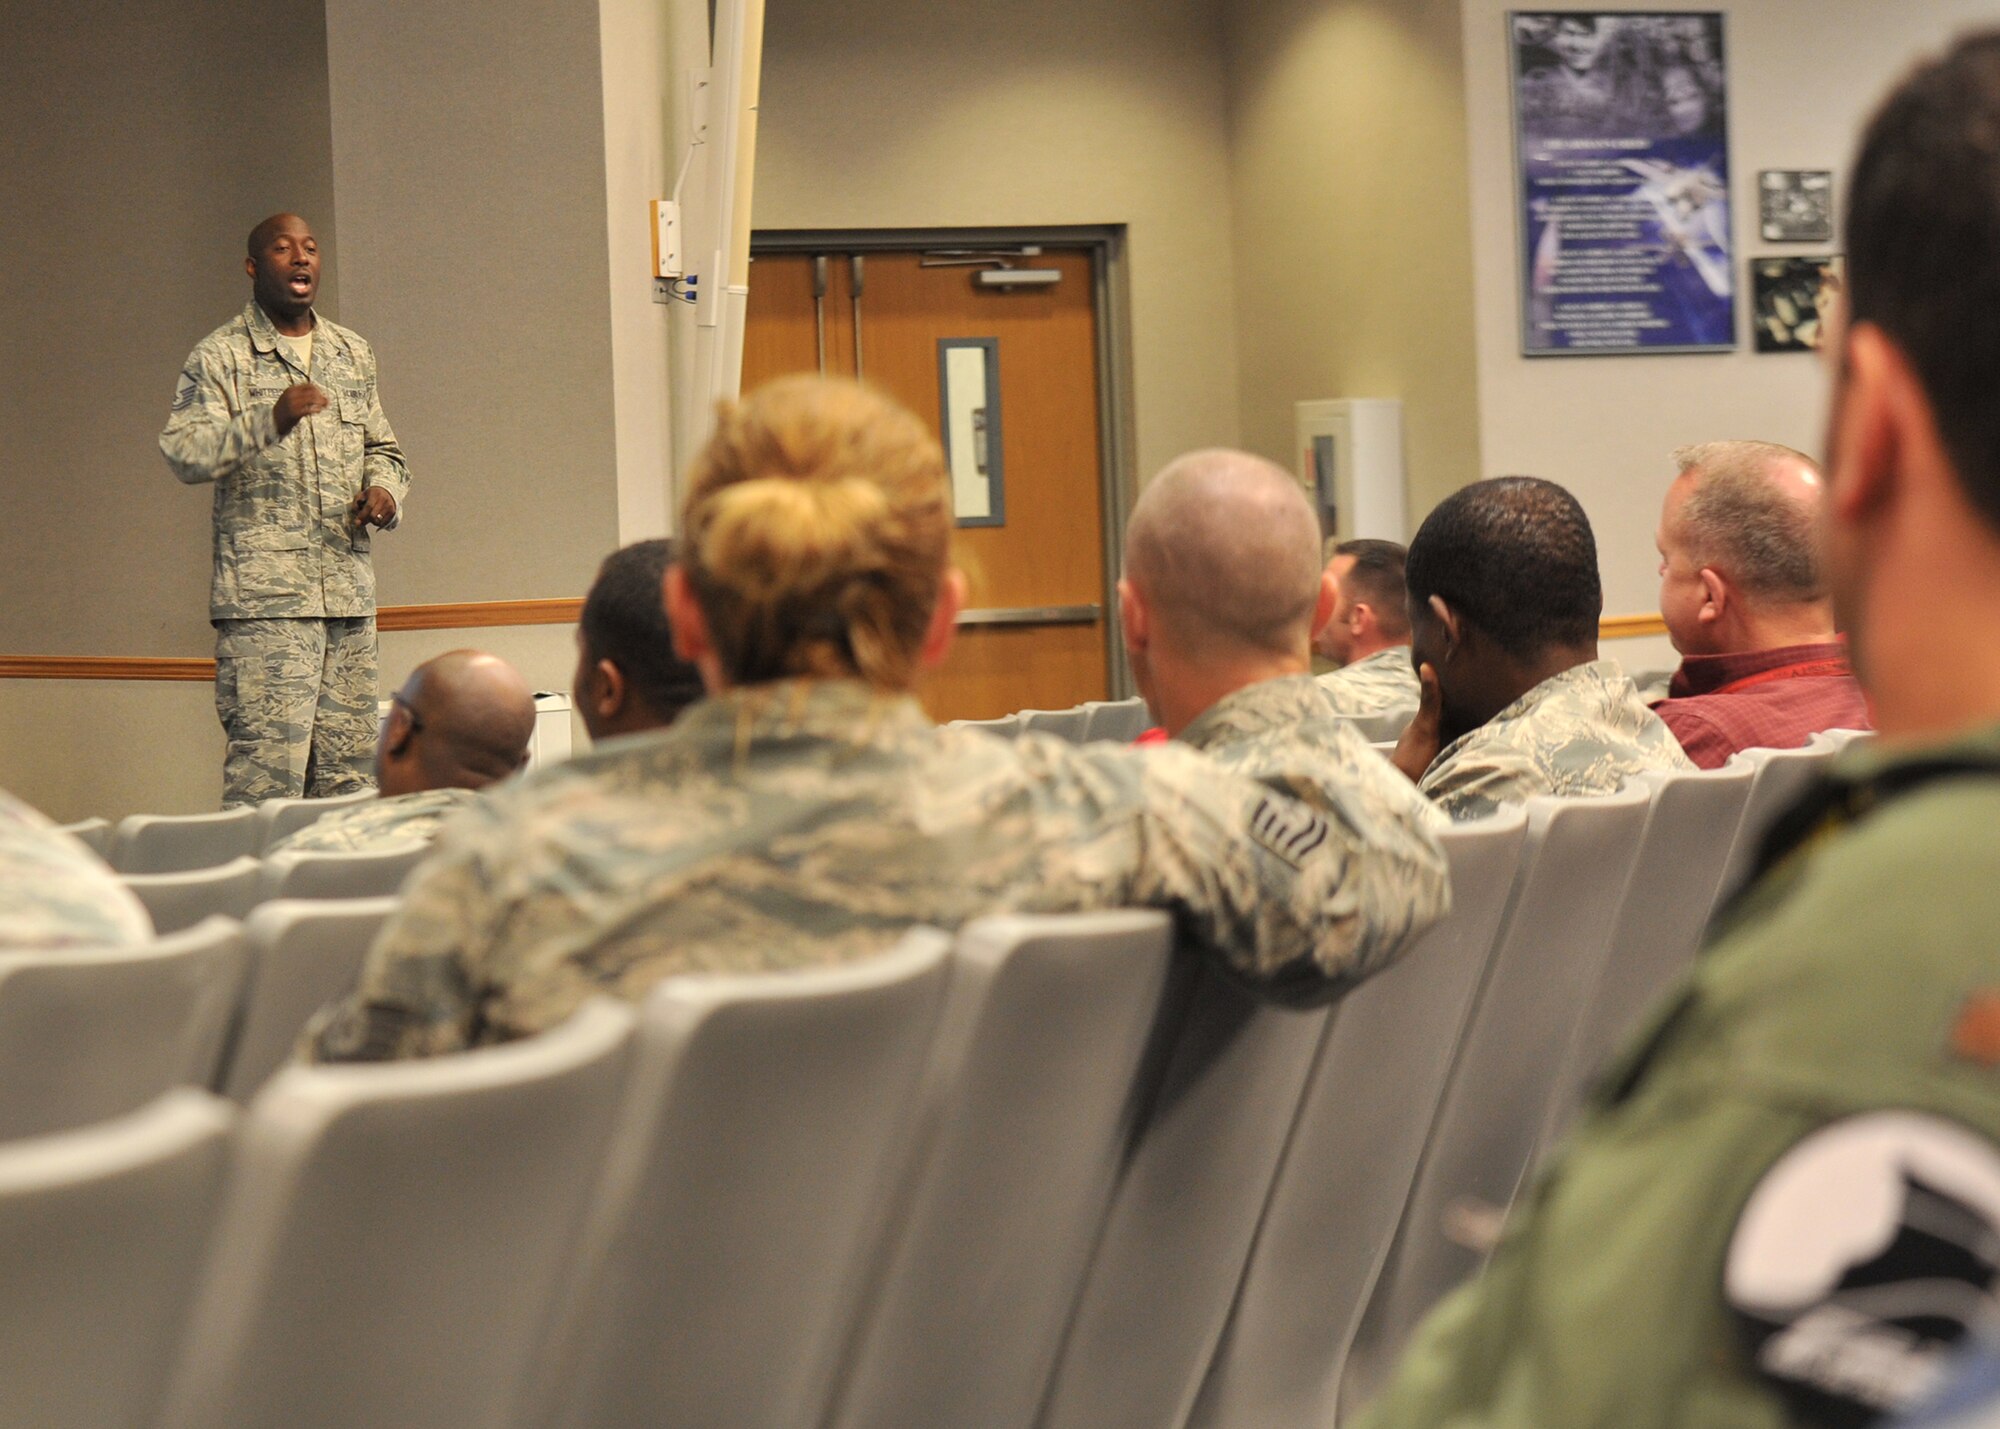 U.S. Air Force Master Sgt. Timothy Whitfield, 325th Maintenance Squadron munitions storage NCO in charge, briefs during a Green Dot training seminar at the 337th Air Control Squadron Dex Rogers Auditorium on Tyndall AFB, Fla., Oct. 20, 2016. The program incorporates both hypothetical and real firsthand violent scenarios that an Airman might encounter, such as sexual assault. (U.S. Air Force photo by Senior Airman Ty-Rico Lea/Released)